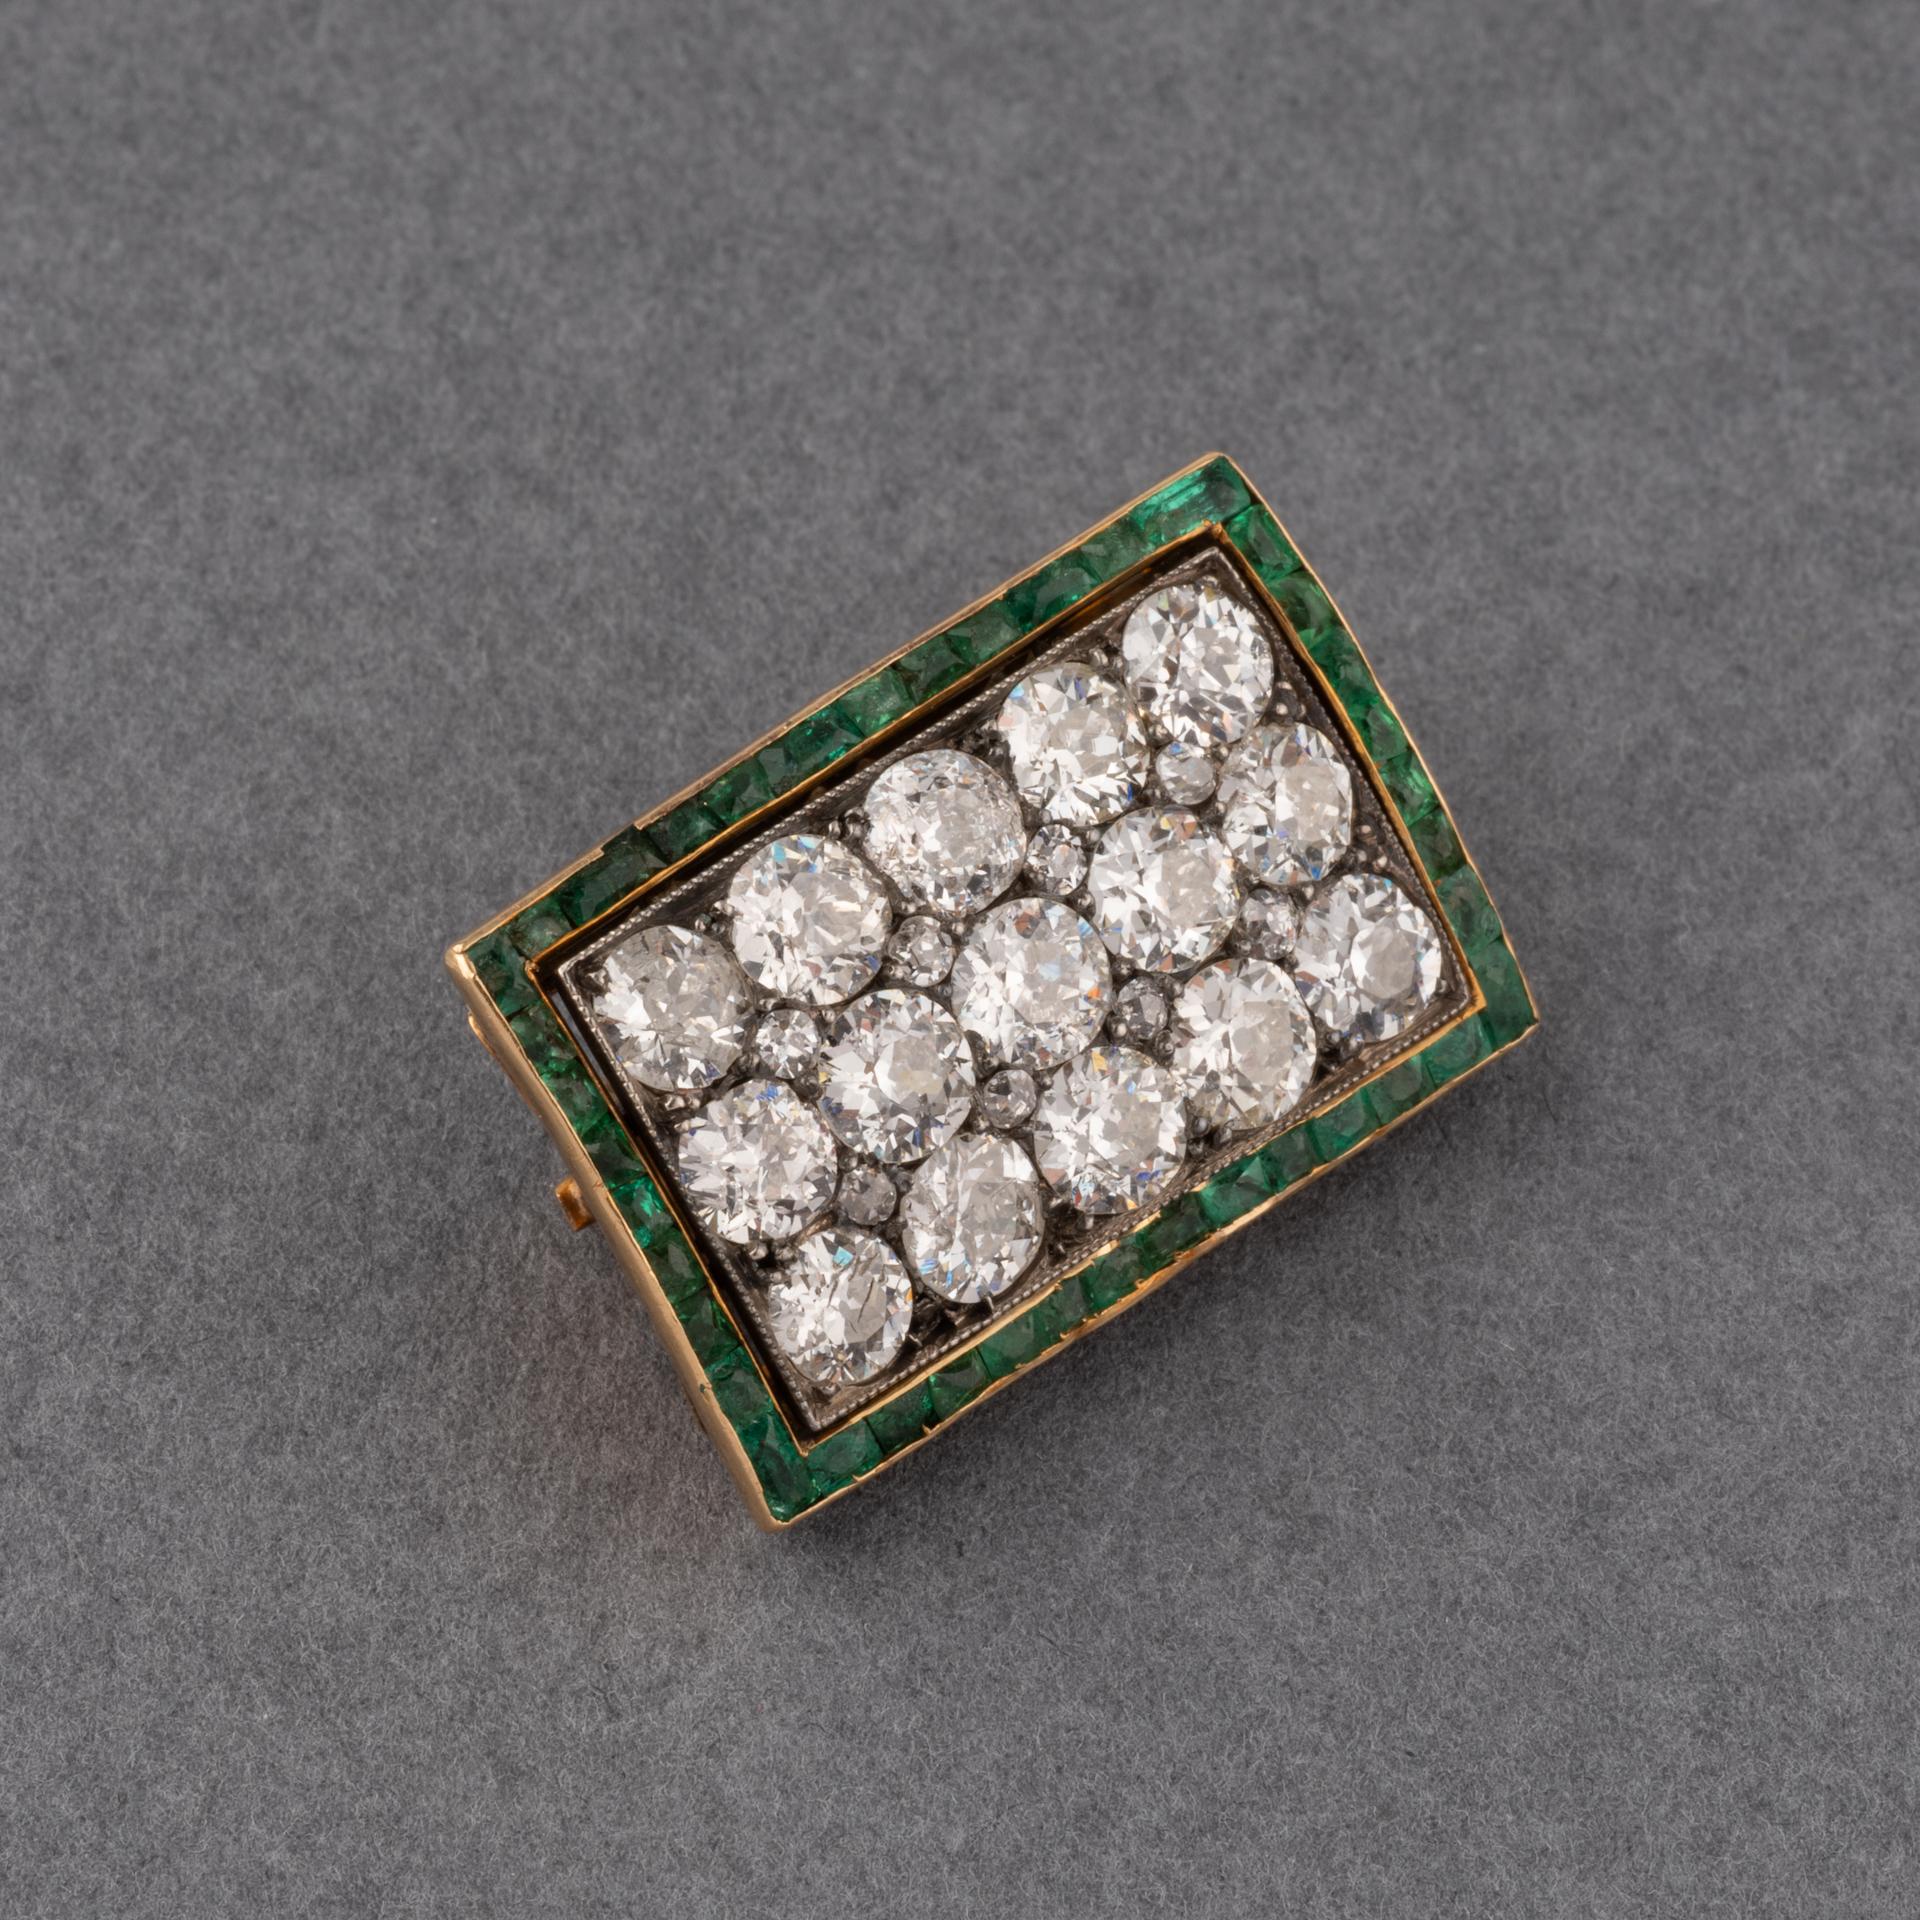 A lovely antique brooch, European made circa 1910.
Made in rose gold and set with approximately 3 carats of diamonds. Each diamond weights 0.20 carats each. With emeralds calibrés on the outside.
Dimensions: 23*15mm.
Weight: 4900 euros.